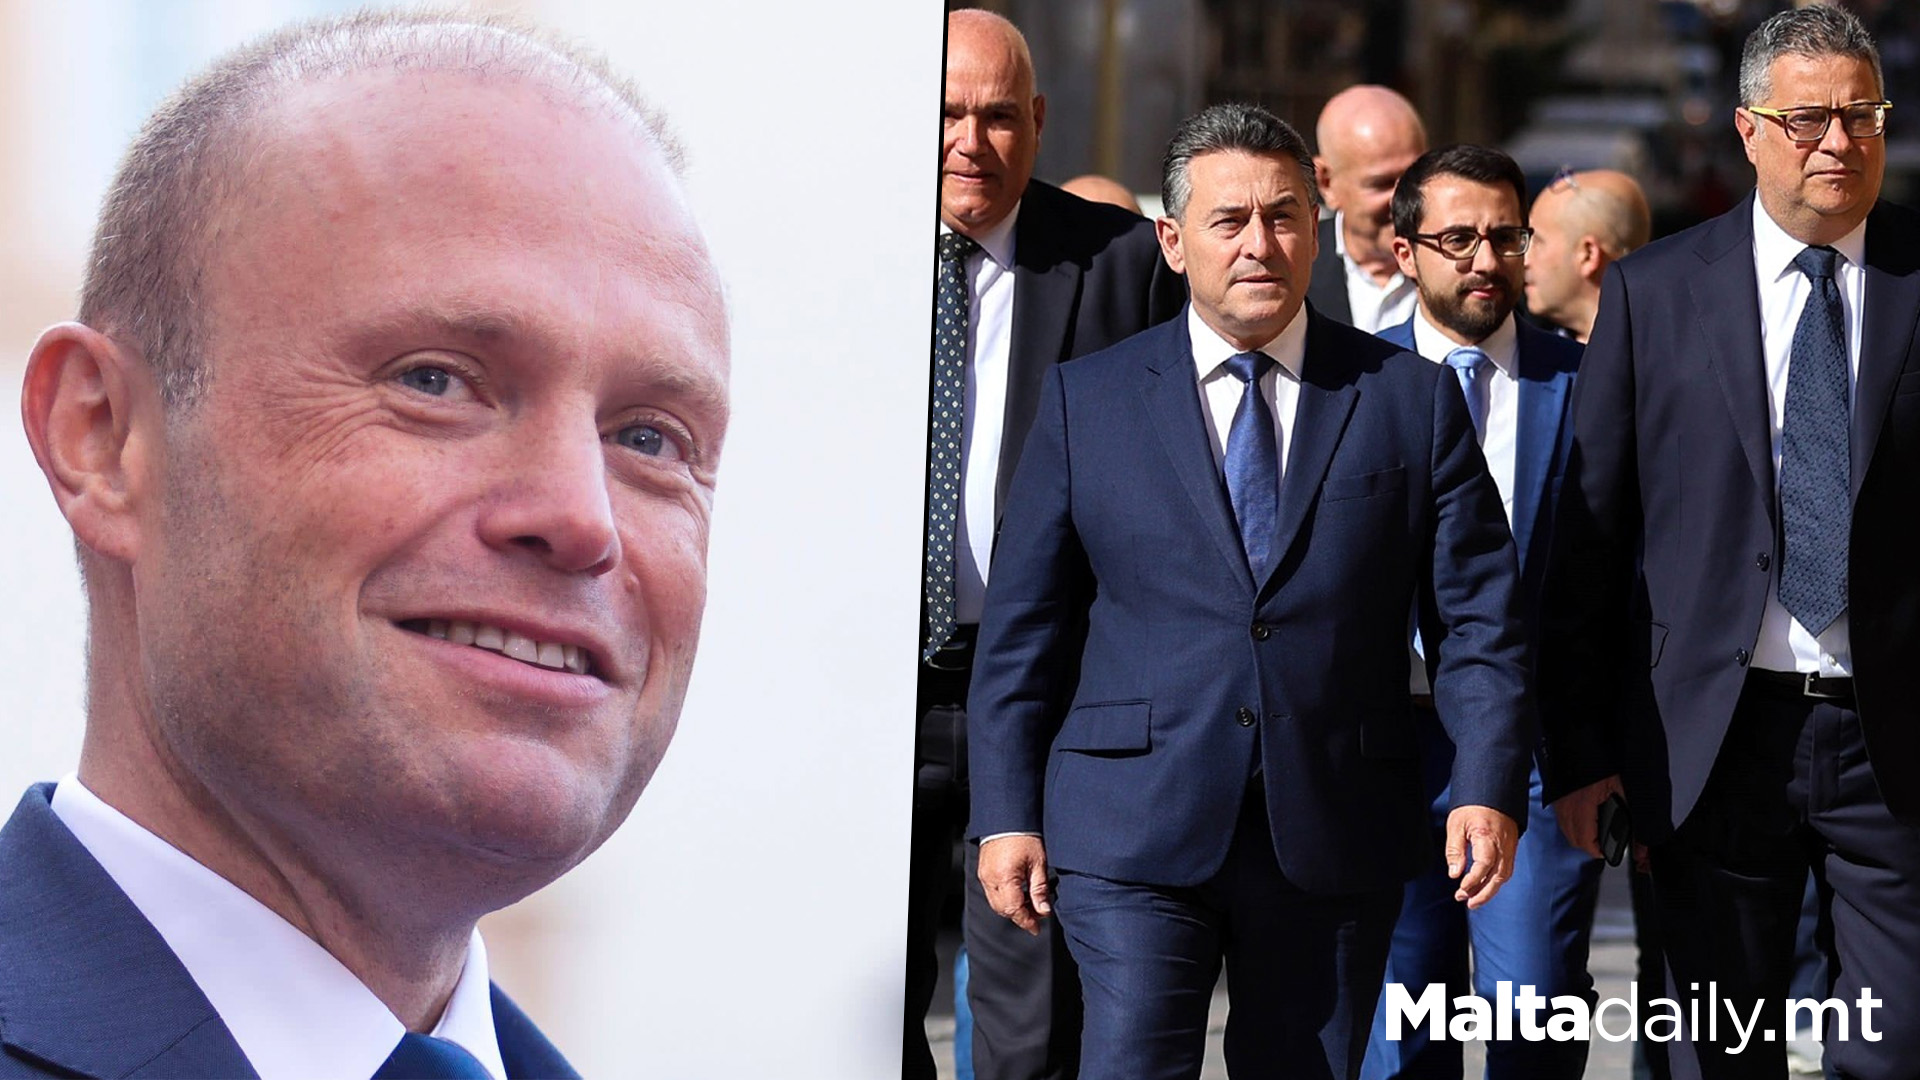 'I Have Nothing To Hide', Says Former PM Joseph Muscat